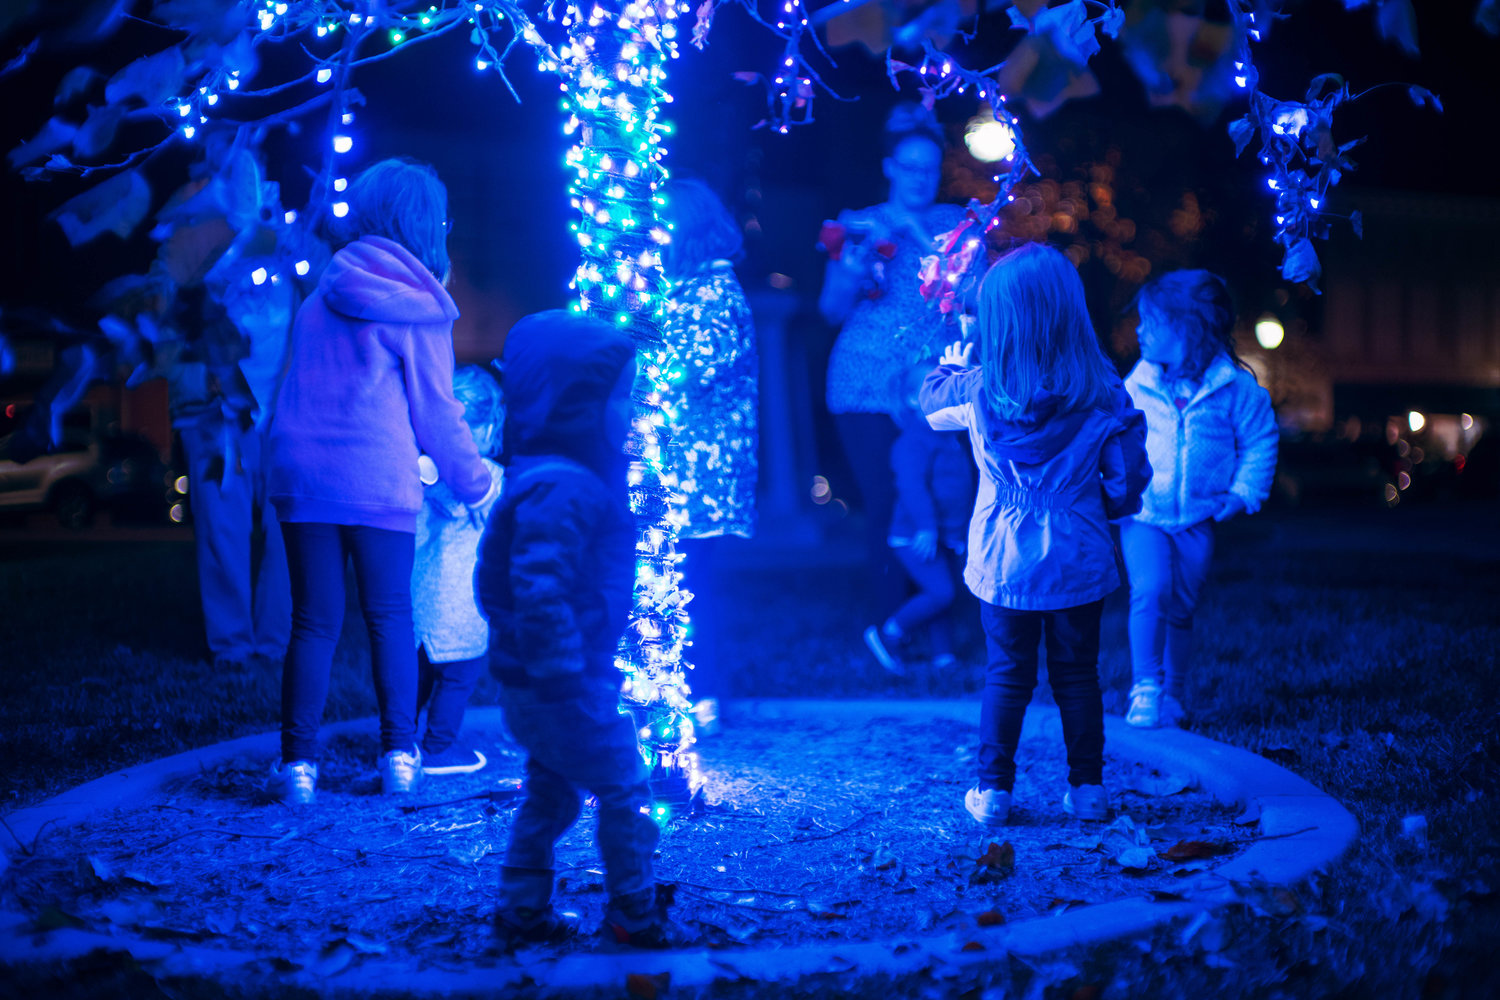 Kids couldn’t help but get a closer look at the Magic Tree in all its electric finery.